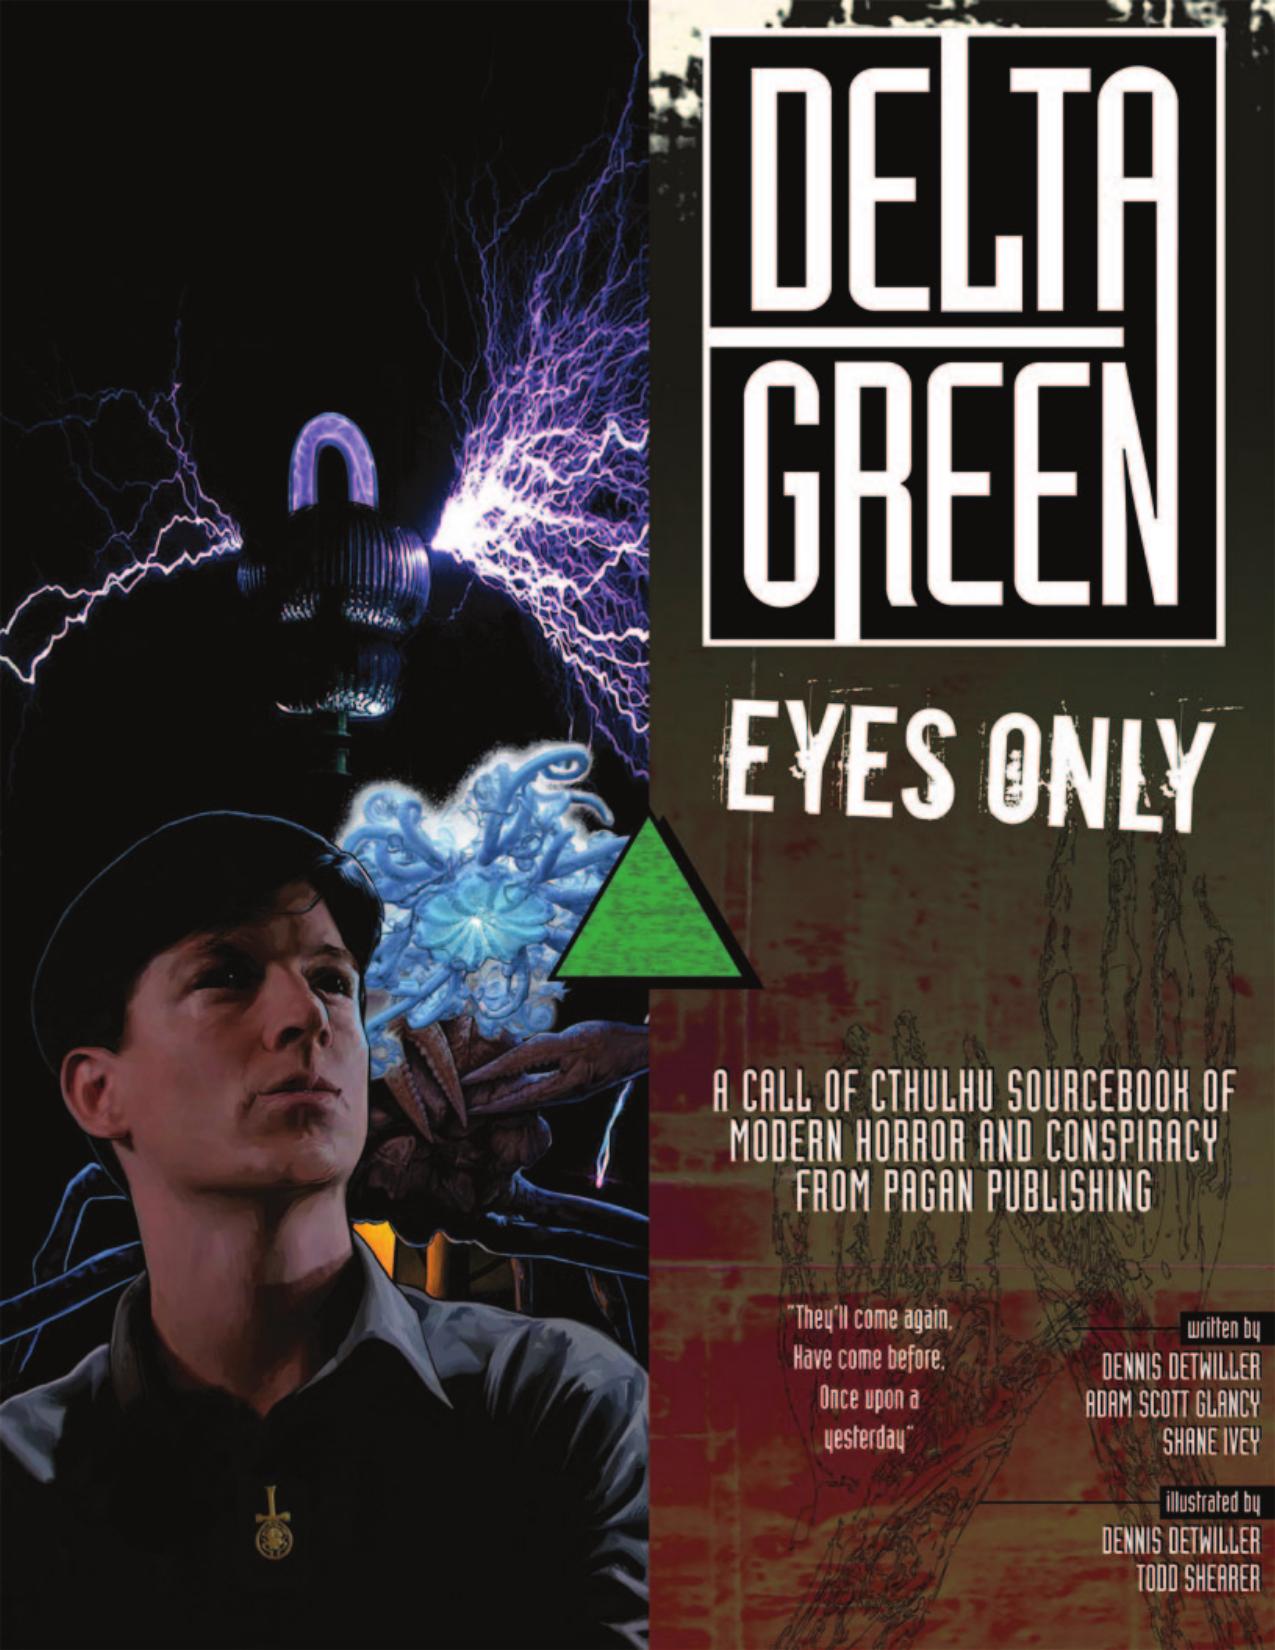 Call of Cthulhu - Delta Green